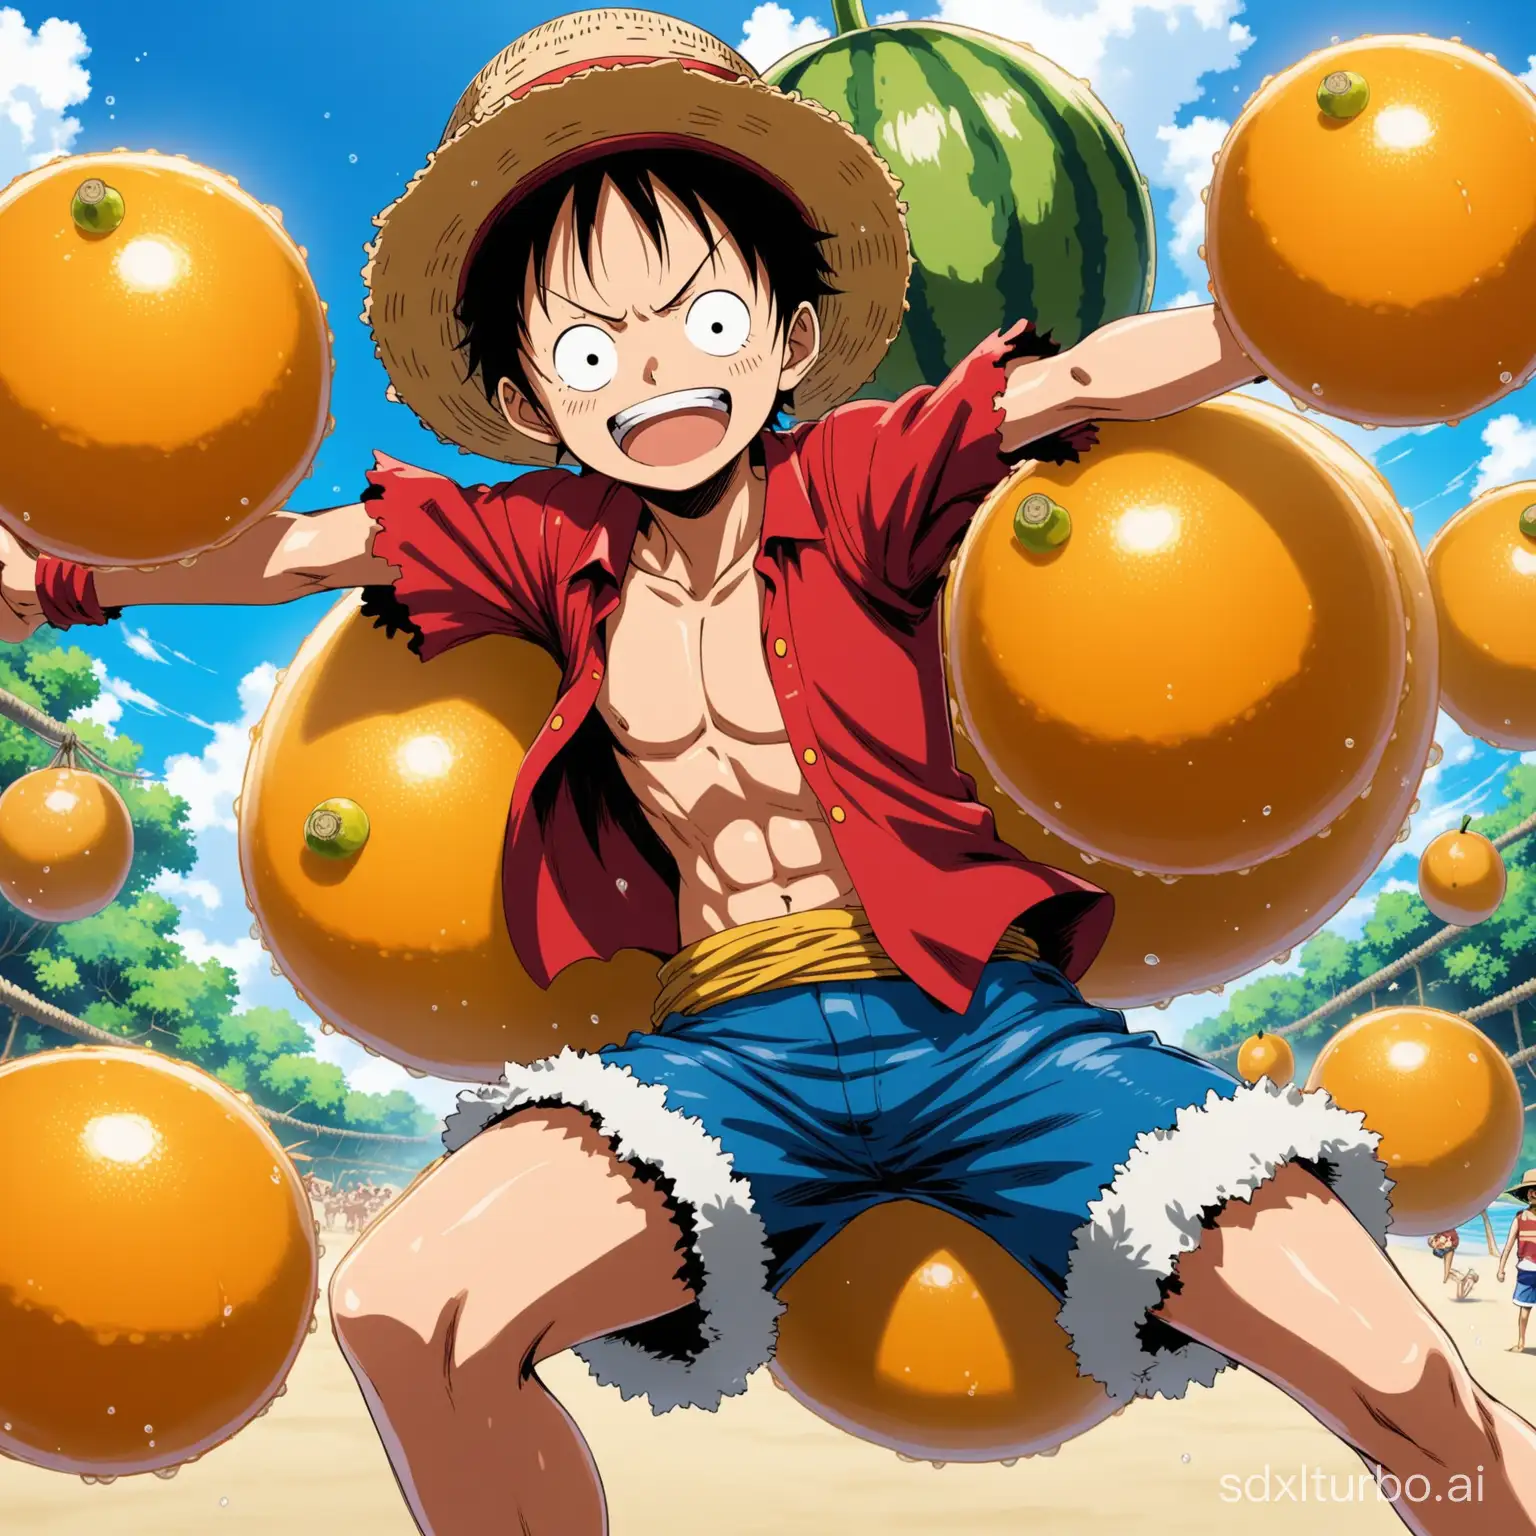 Using Luffy's extended arms to showcase the classic action image of the rubber fruit ability.